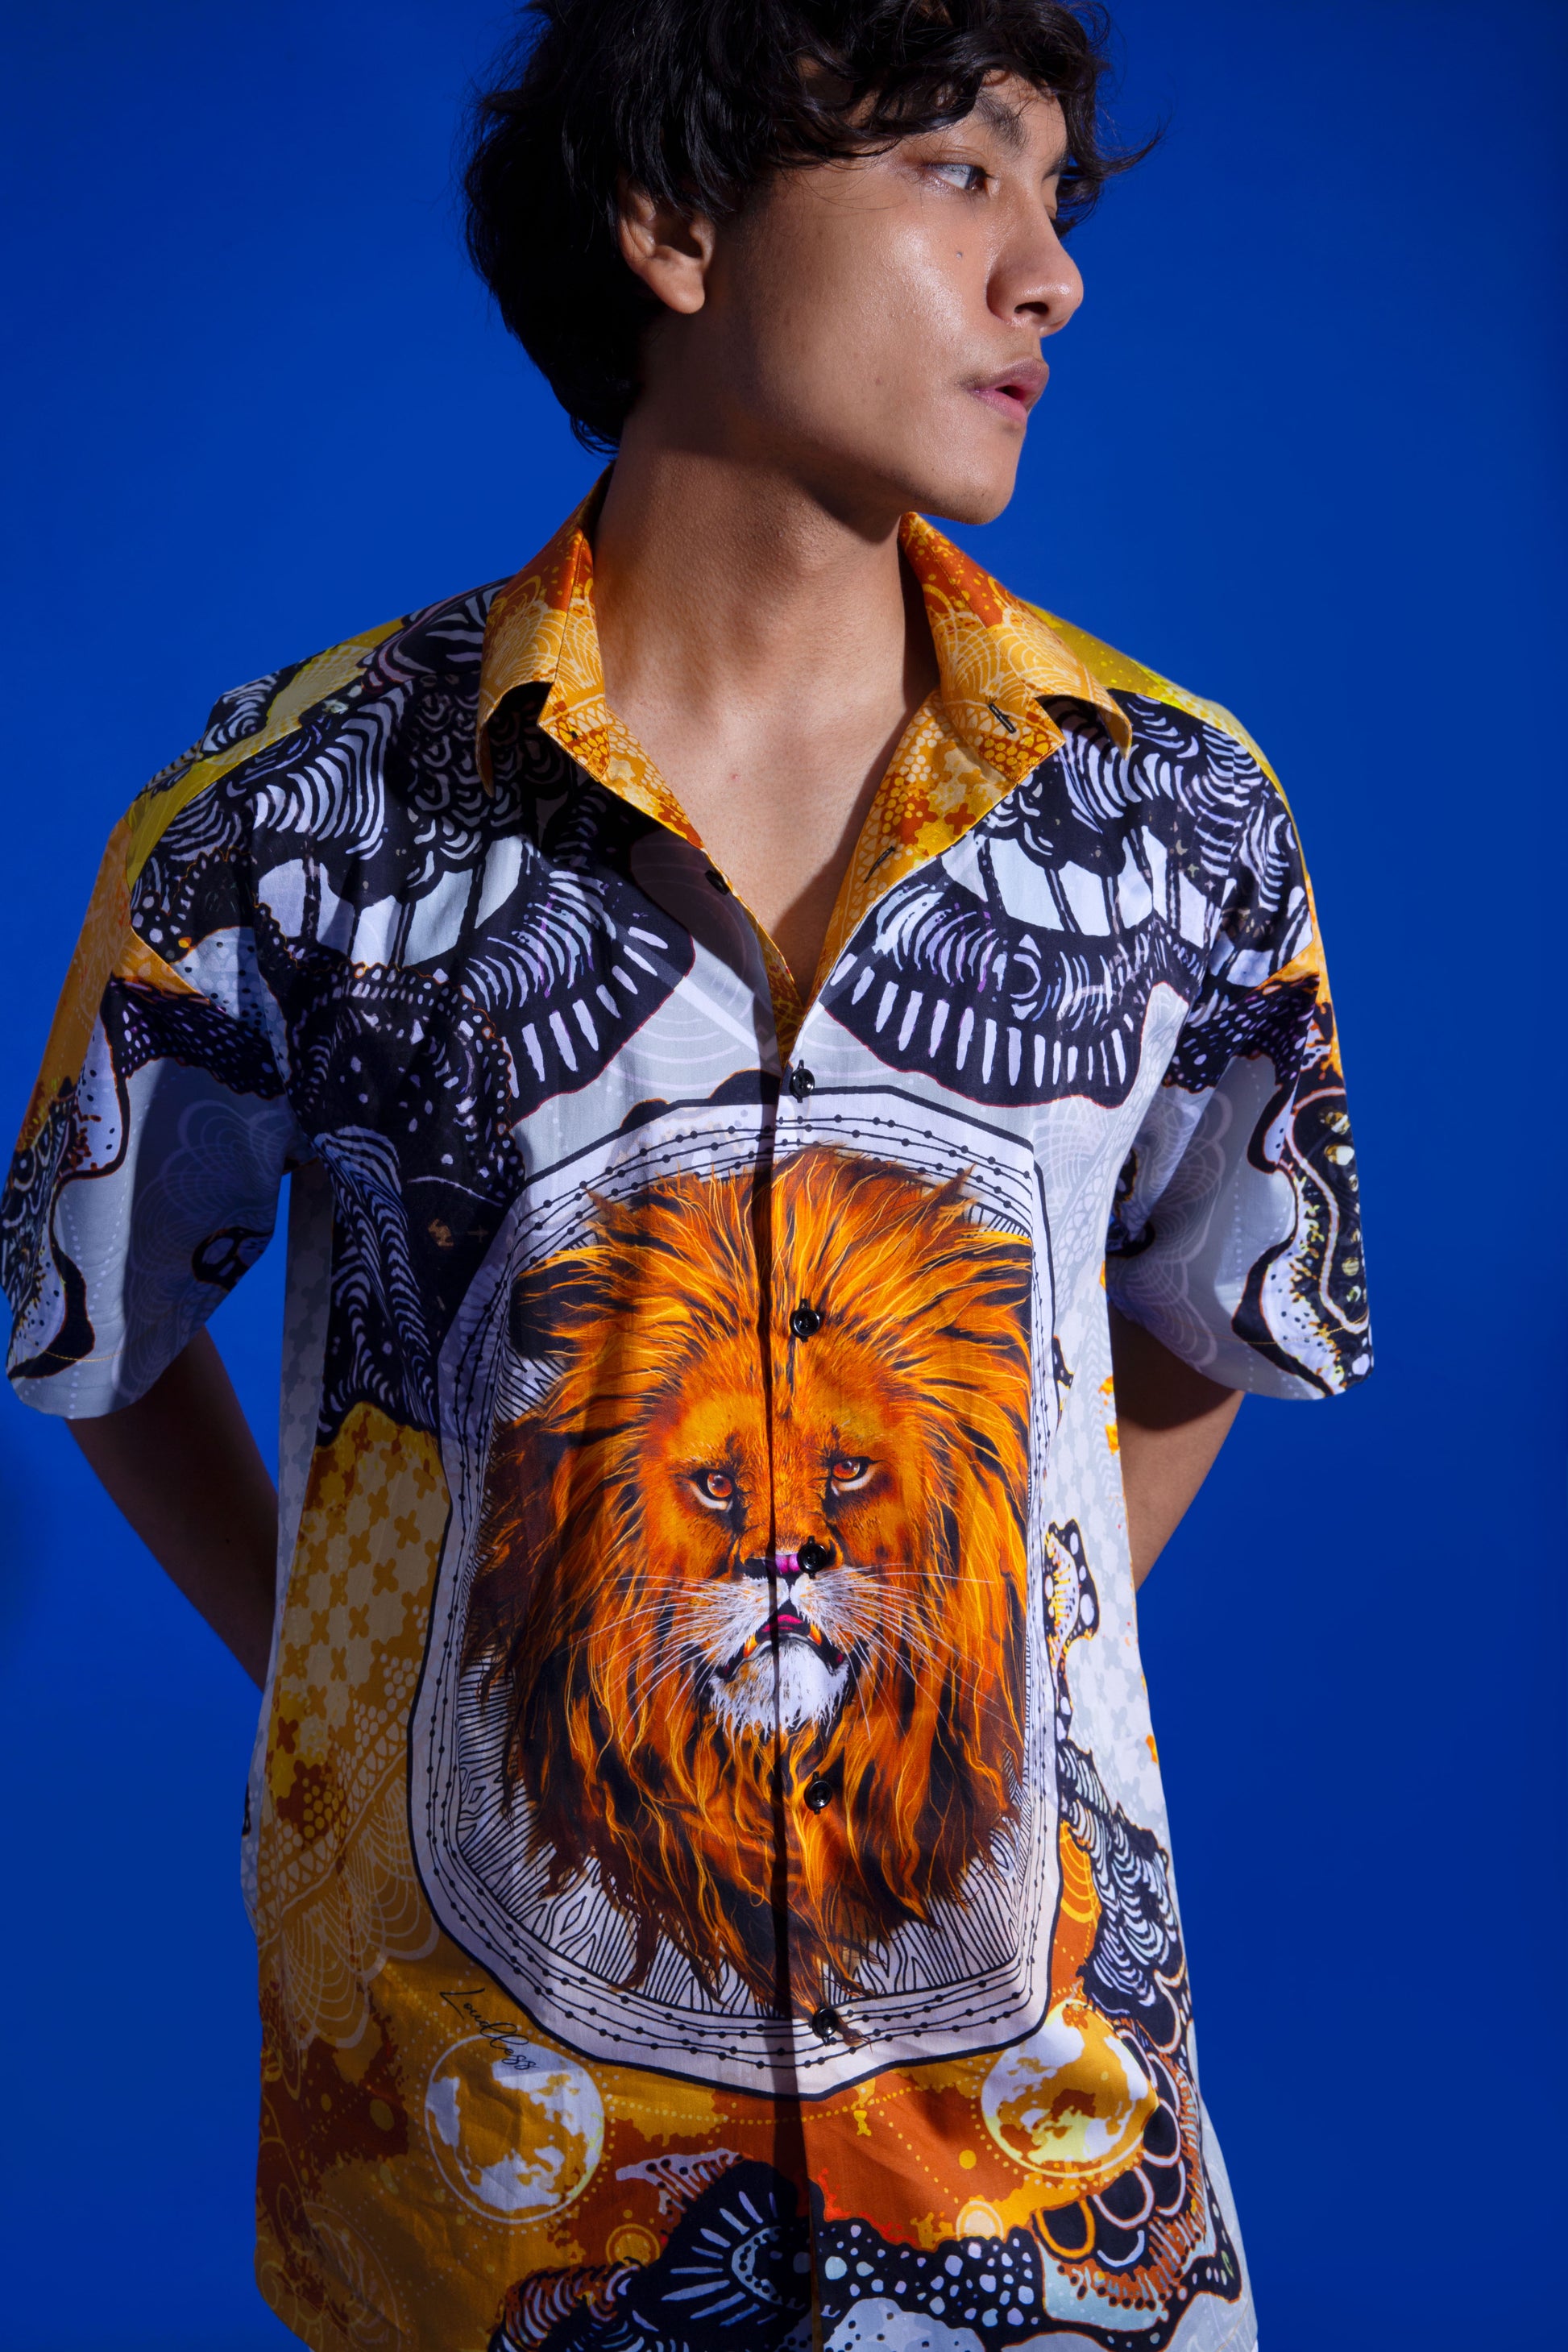 Make a statement with this luxury Lion printed half sleeves shirt, perfect for streetwear and made from comfortable 100% cotton